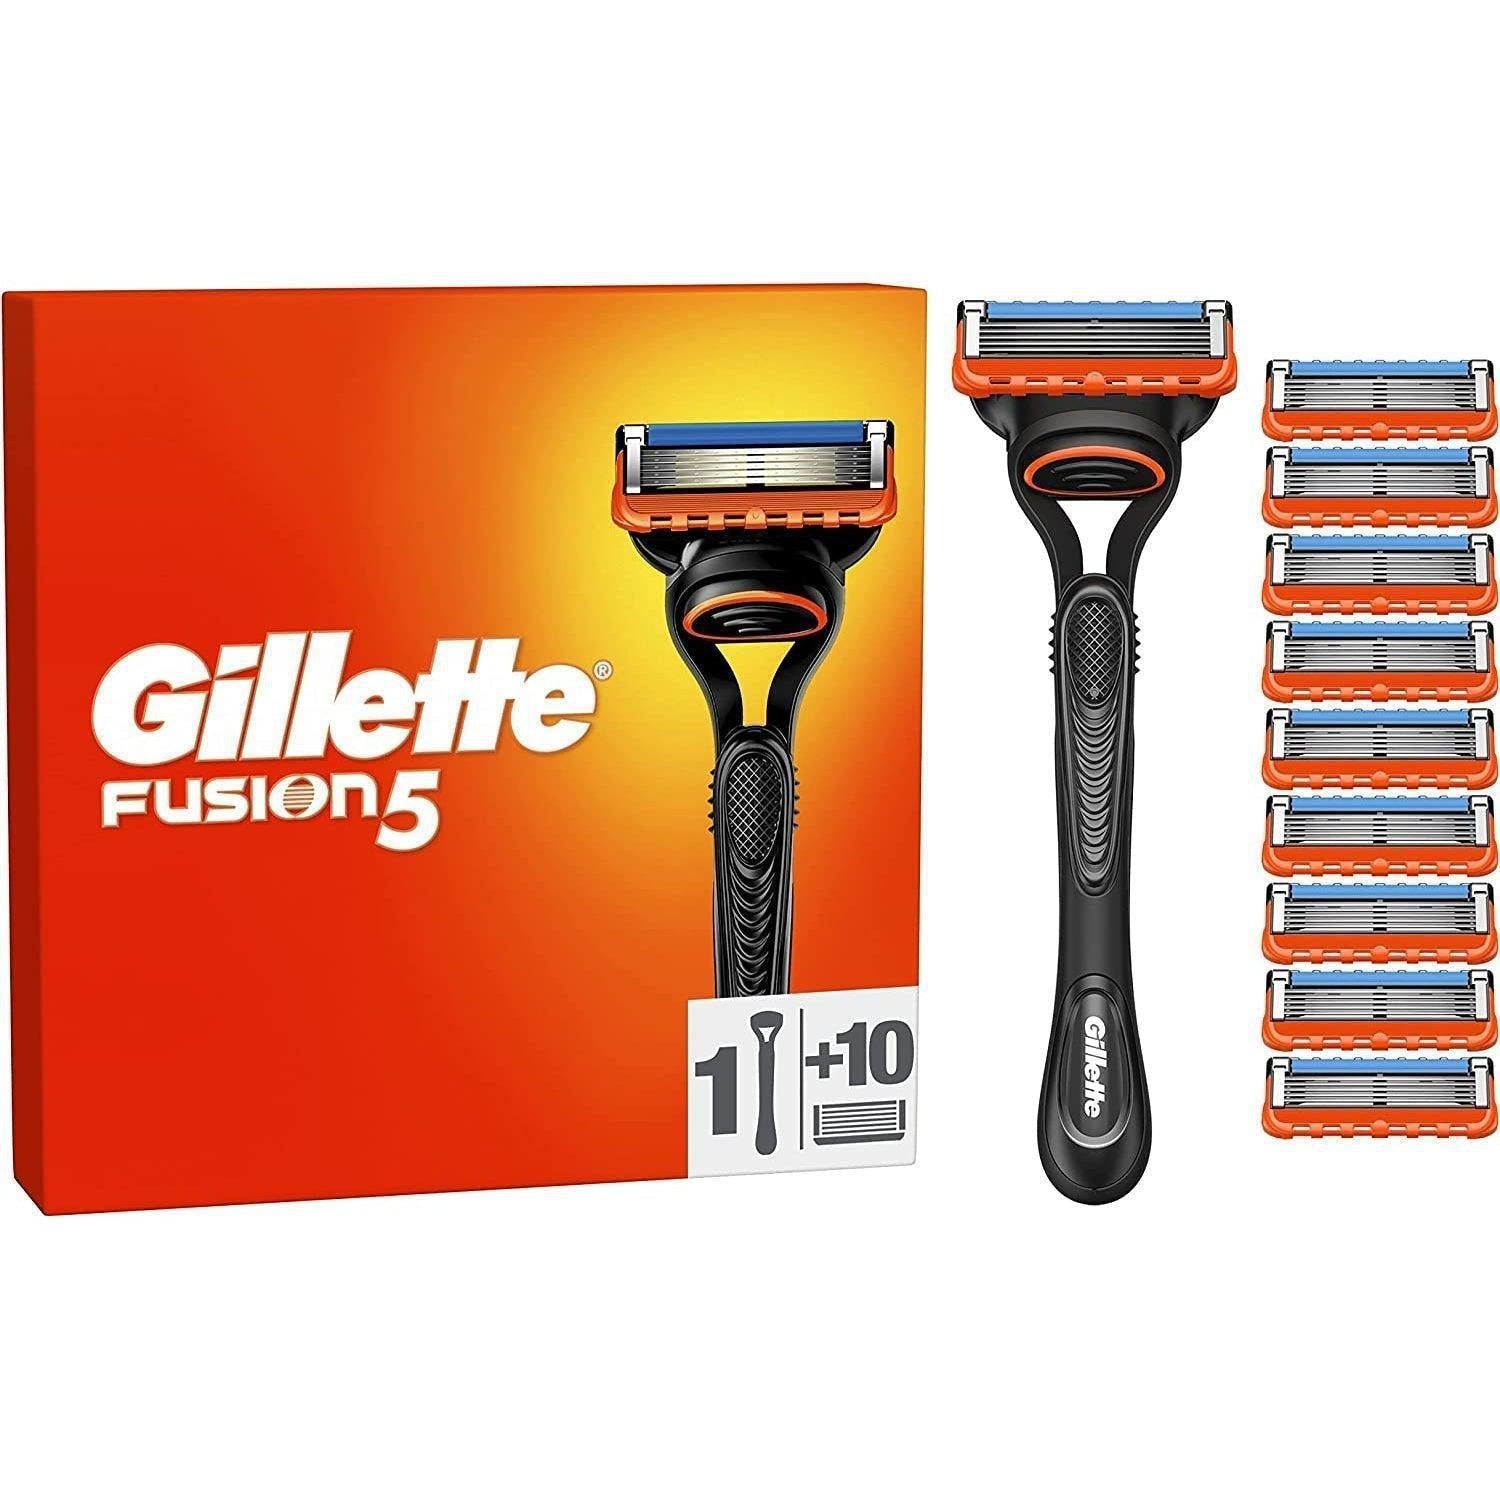 Gillette Fusion5 Razor Big Blade Pack w/ 10 Blade Refill - Five-Blade Technology - Healthxpress.ie